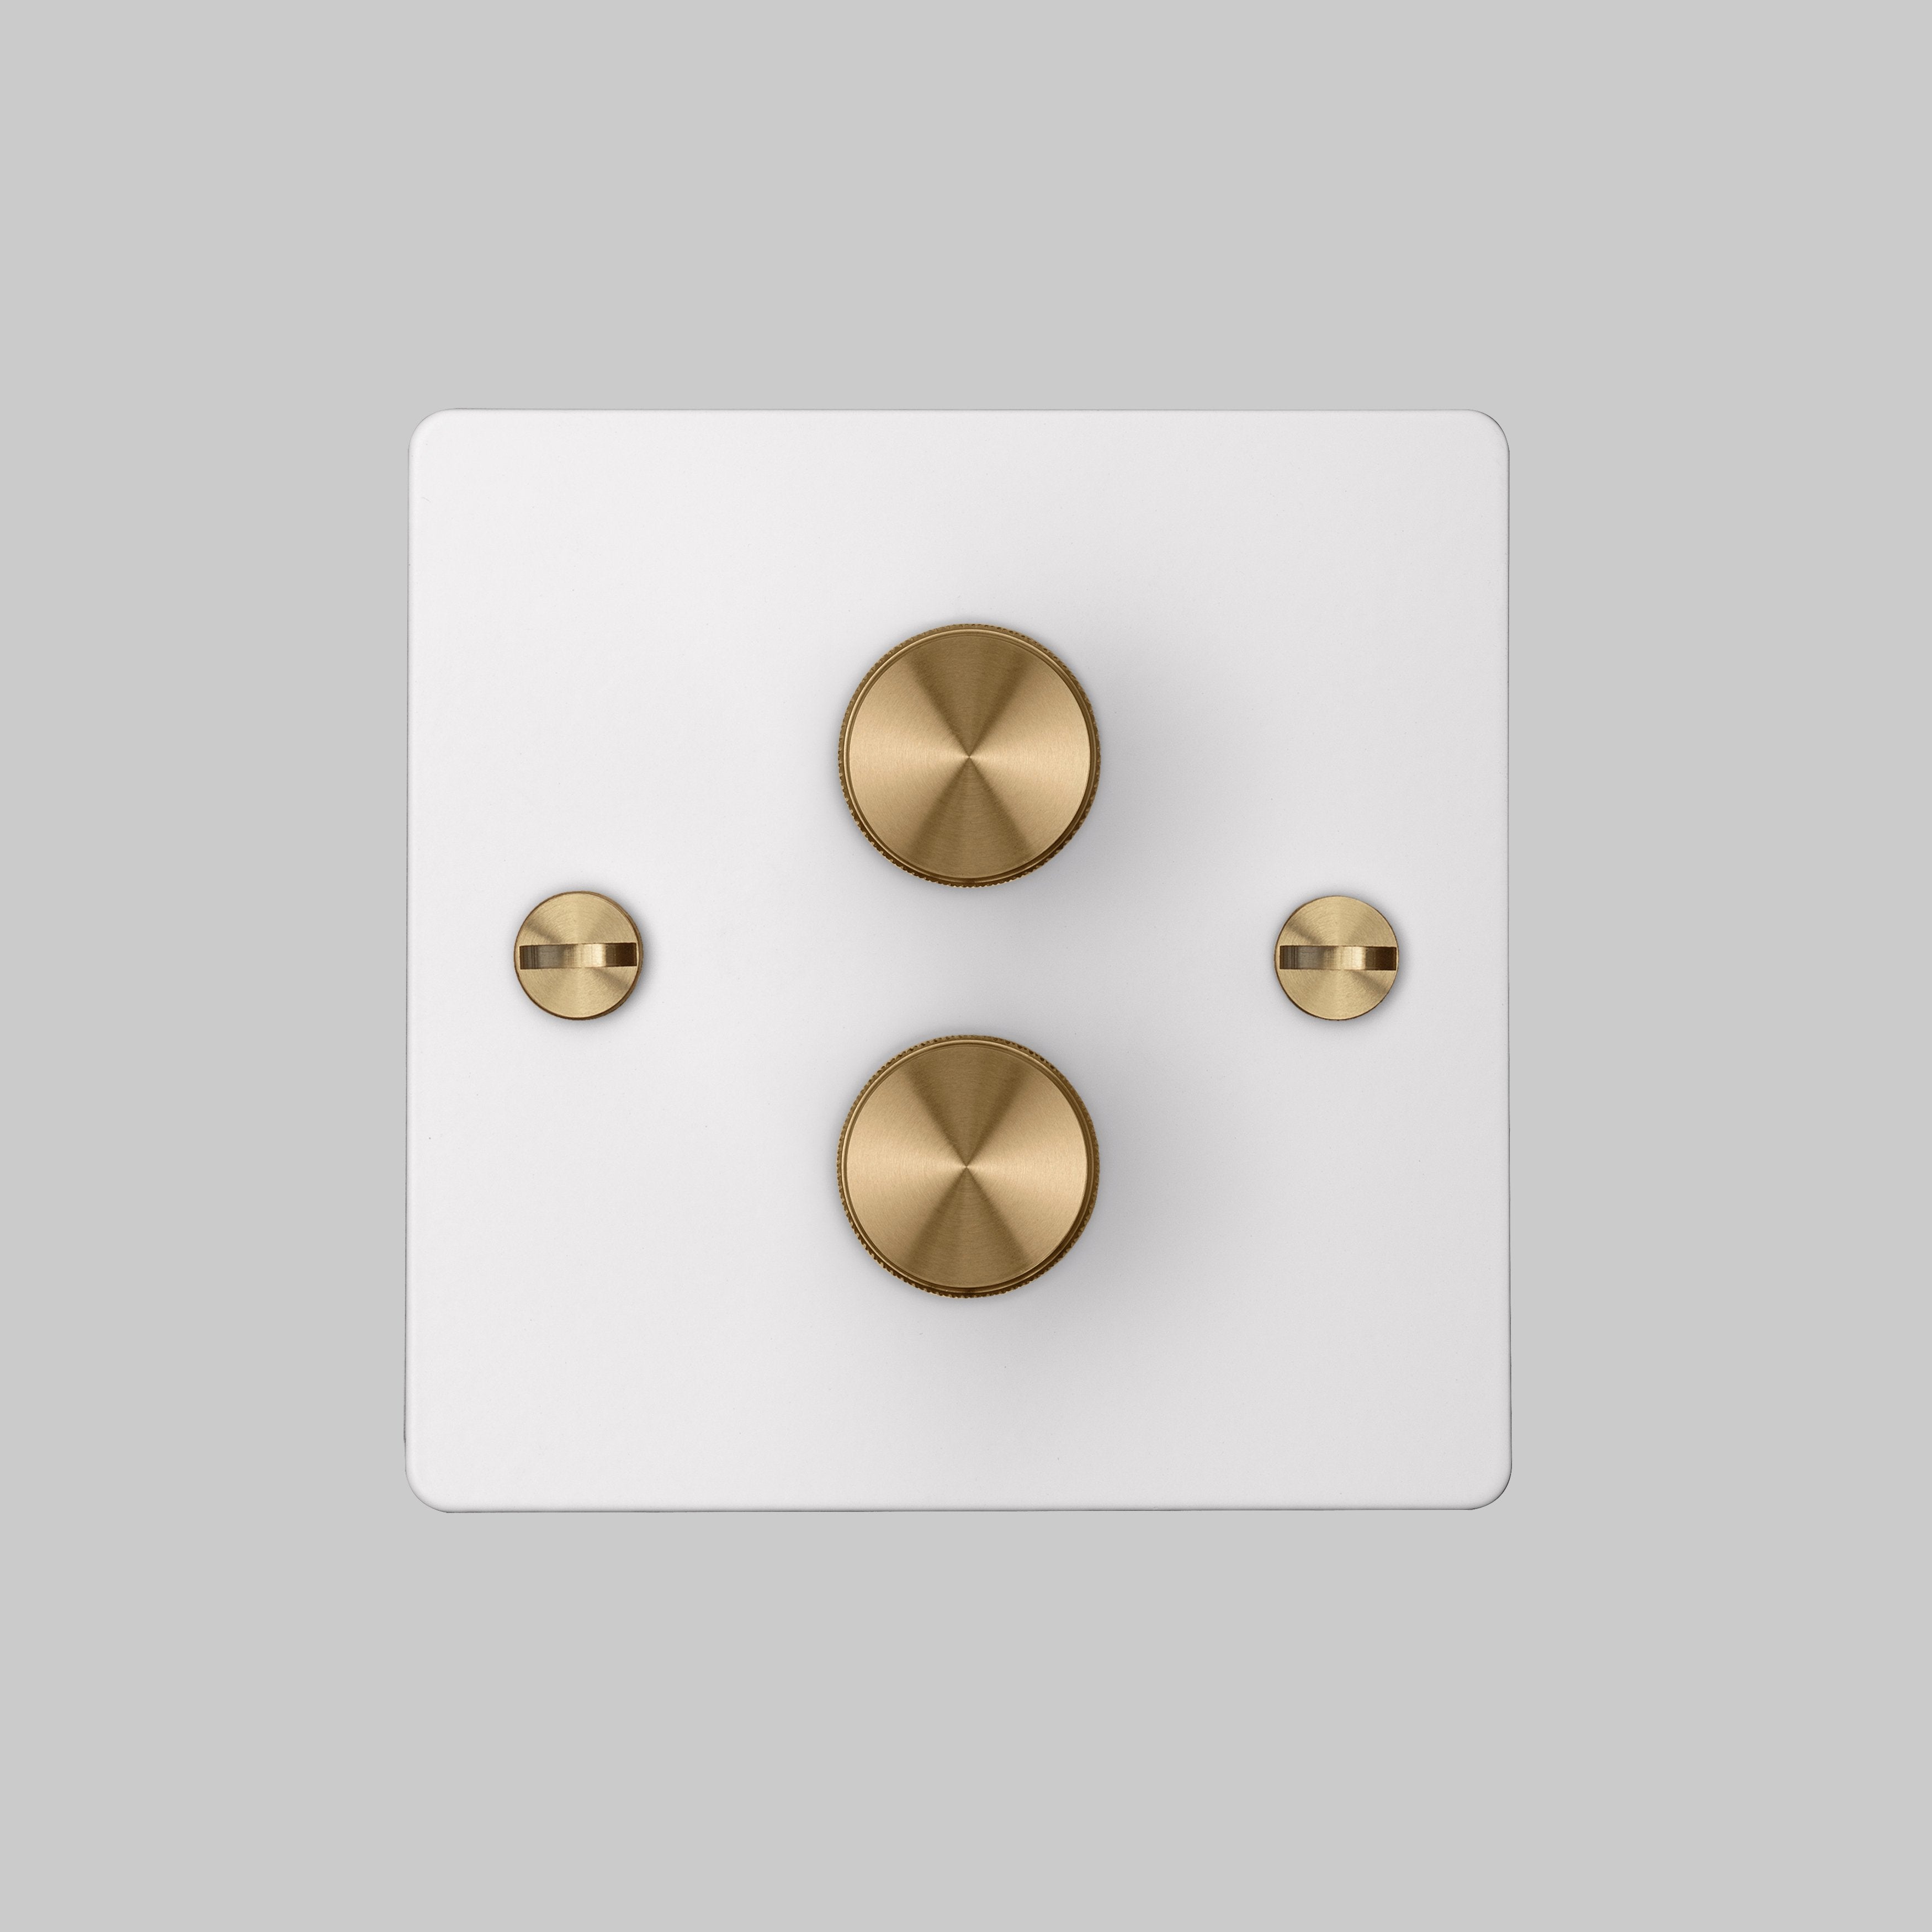 Buster and Punch 2G DIMMER / WHITE / BRASS